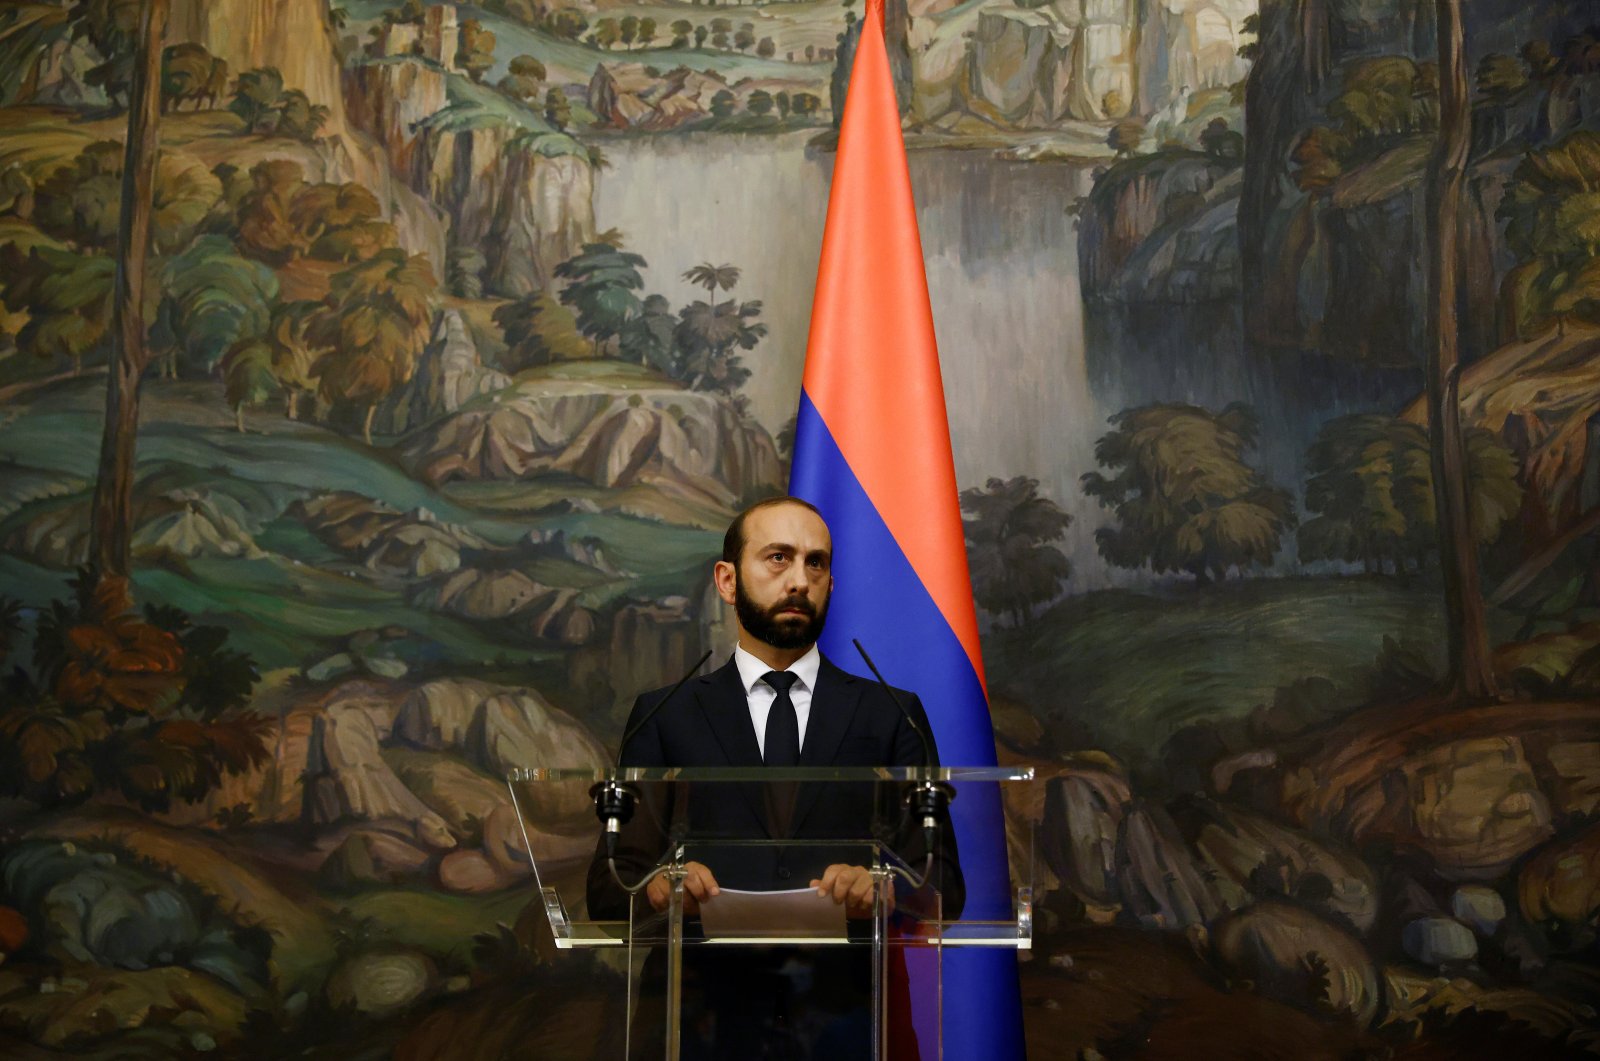 Armenian Foreign Minister Ararat Mirzoyan attends a joint news conference with Russian Foreign Minister Sergey Lavrov following their meeting in Moscow, Russia, Aug. 31, 2021. (Reuters Photo)